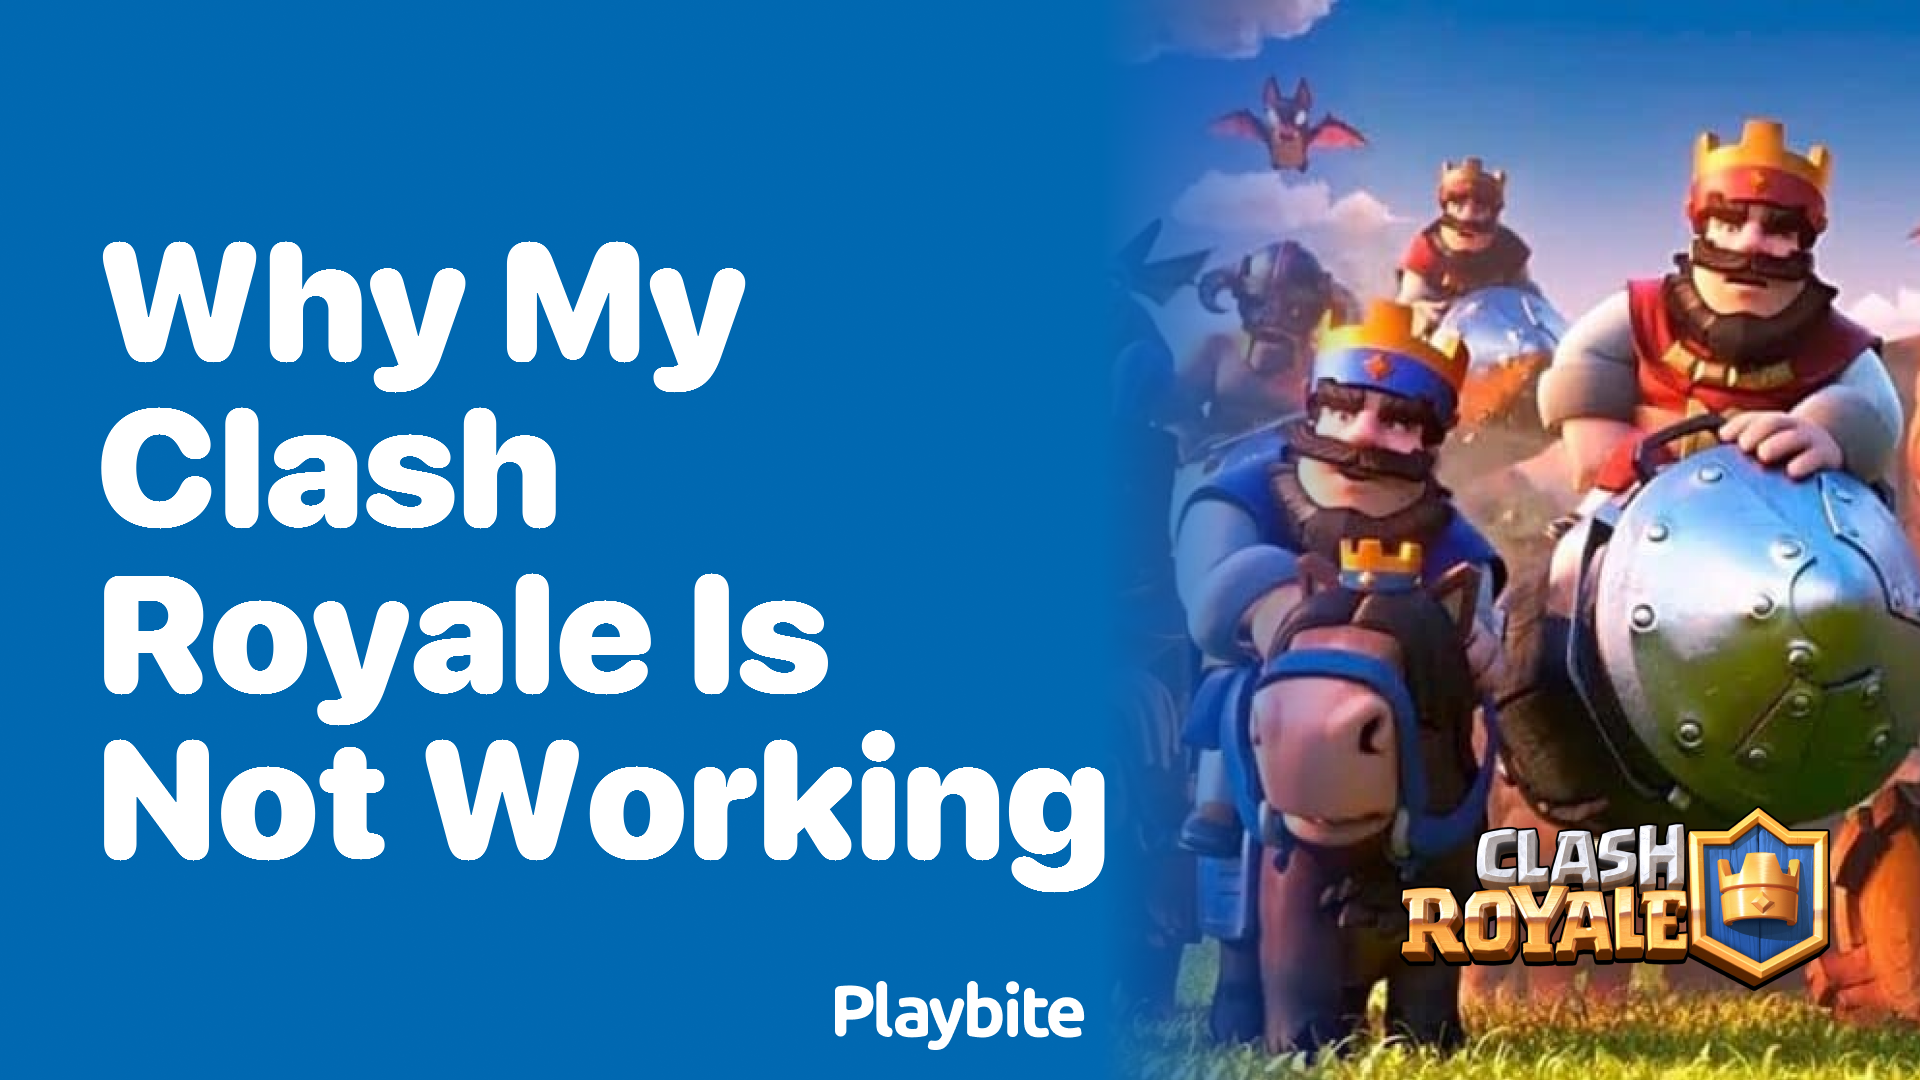 Why Is My Clash Royale Not Working? Let&#8217;s Troubleshoot Together!